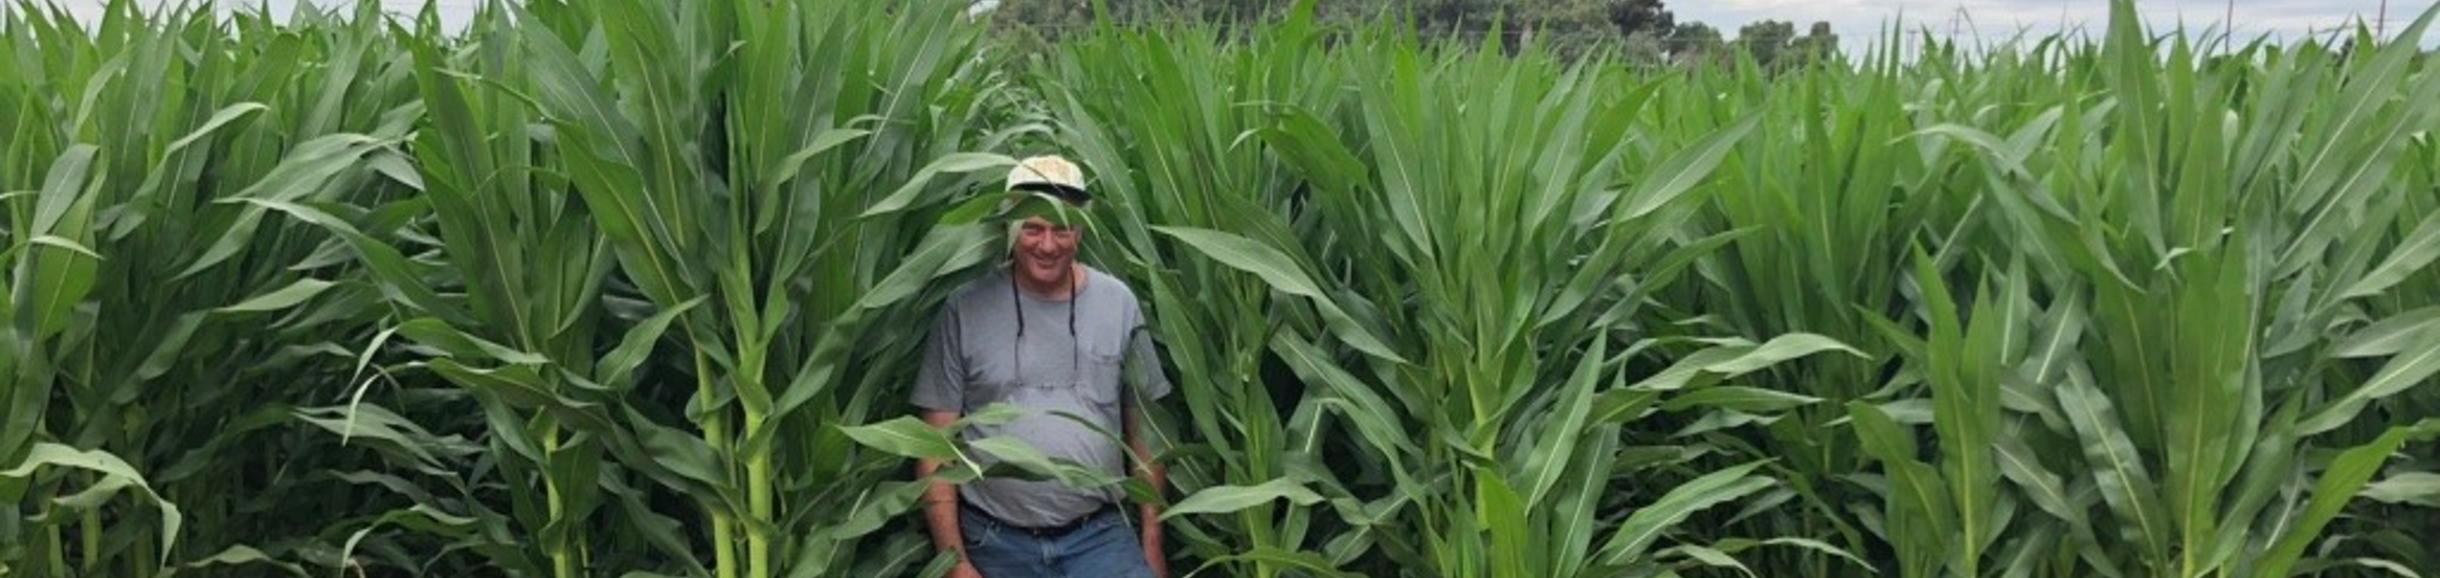 Tall corn - bob standing in middle